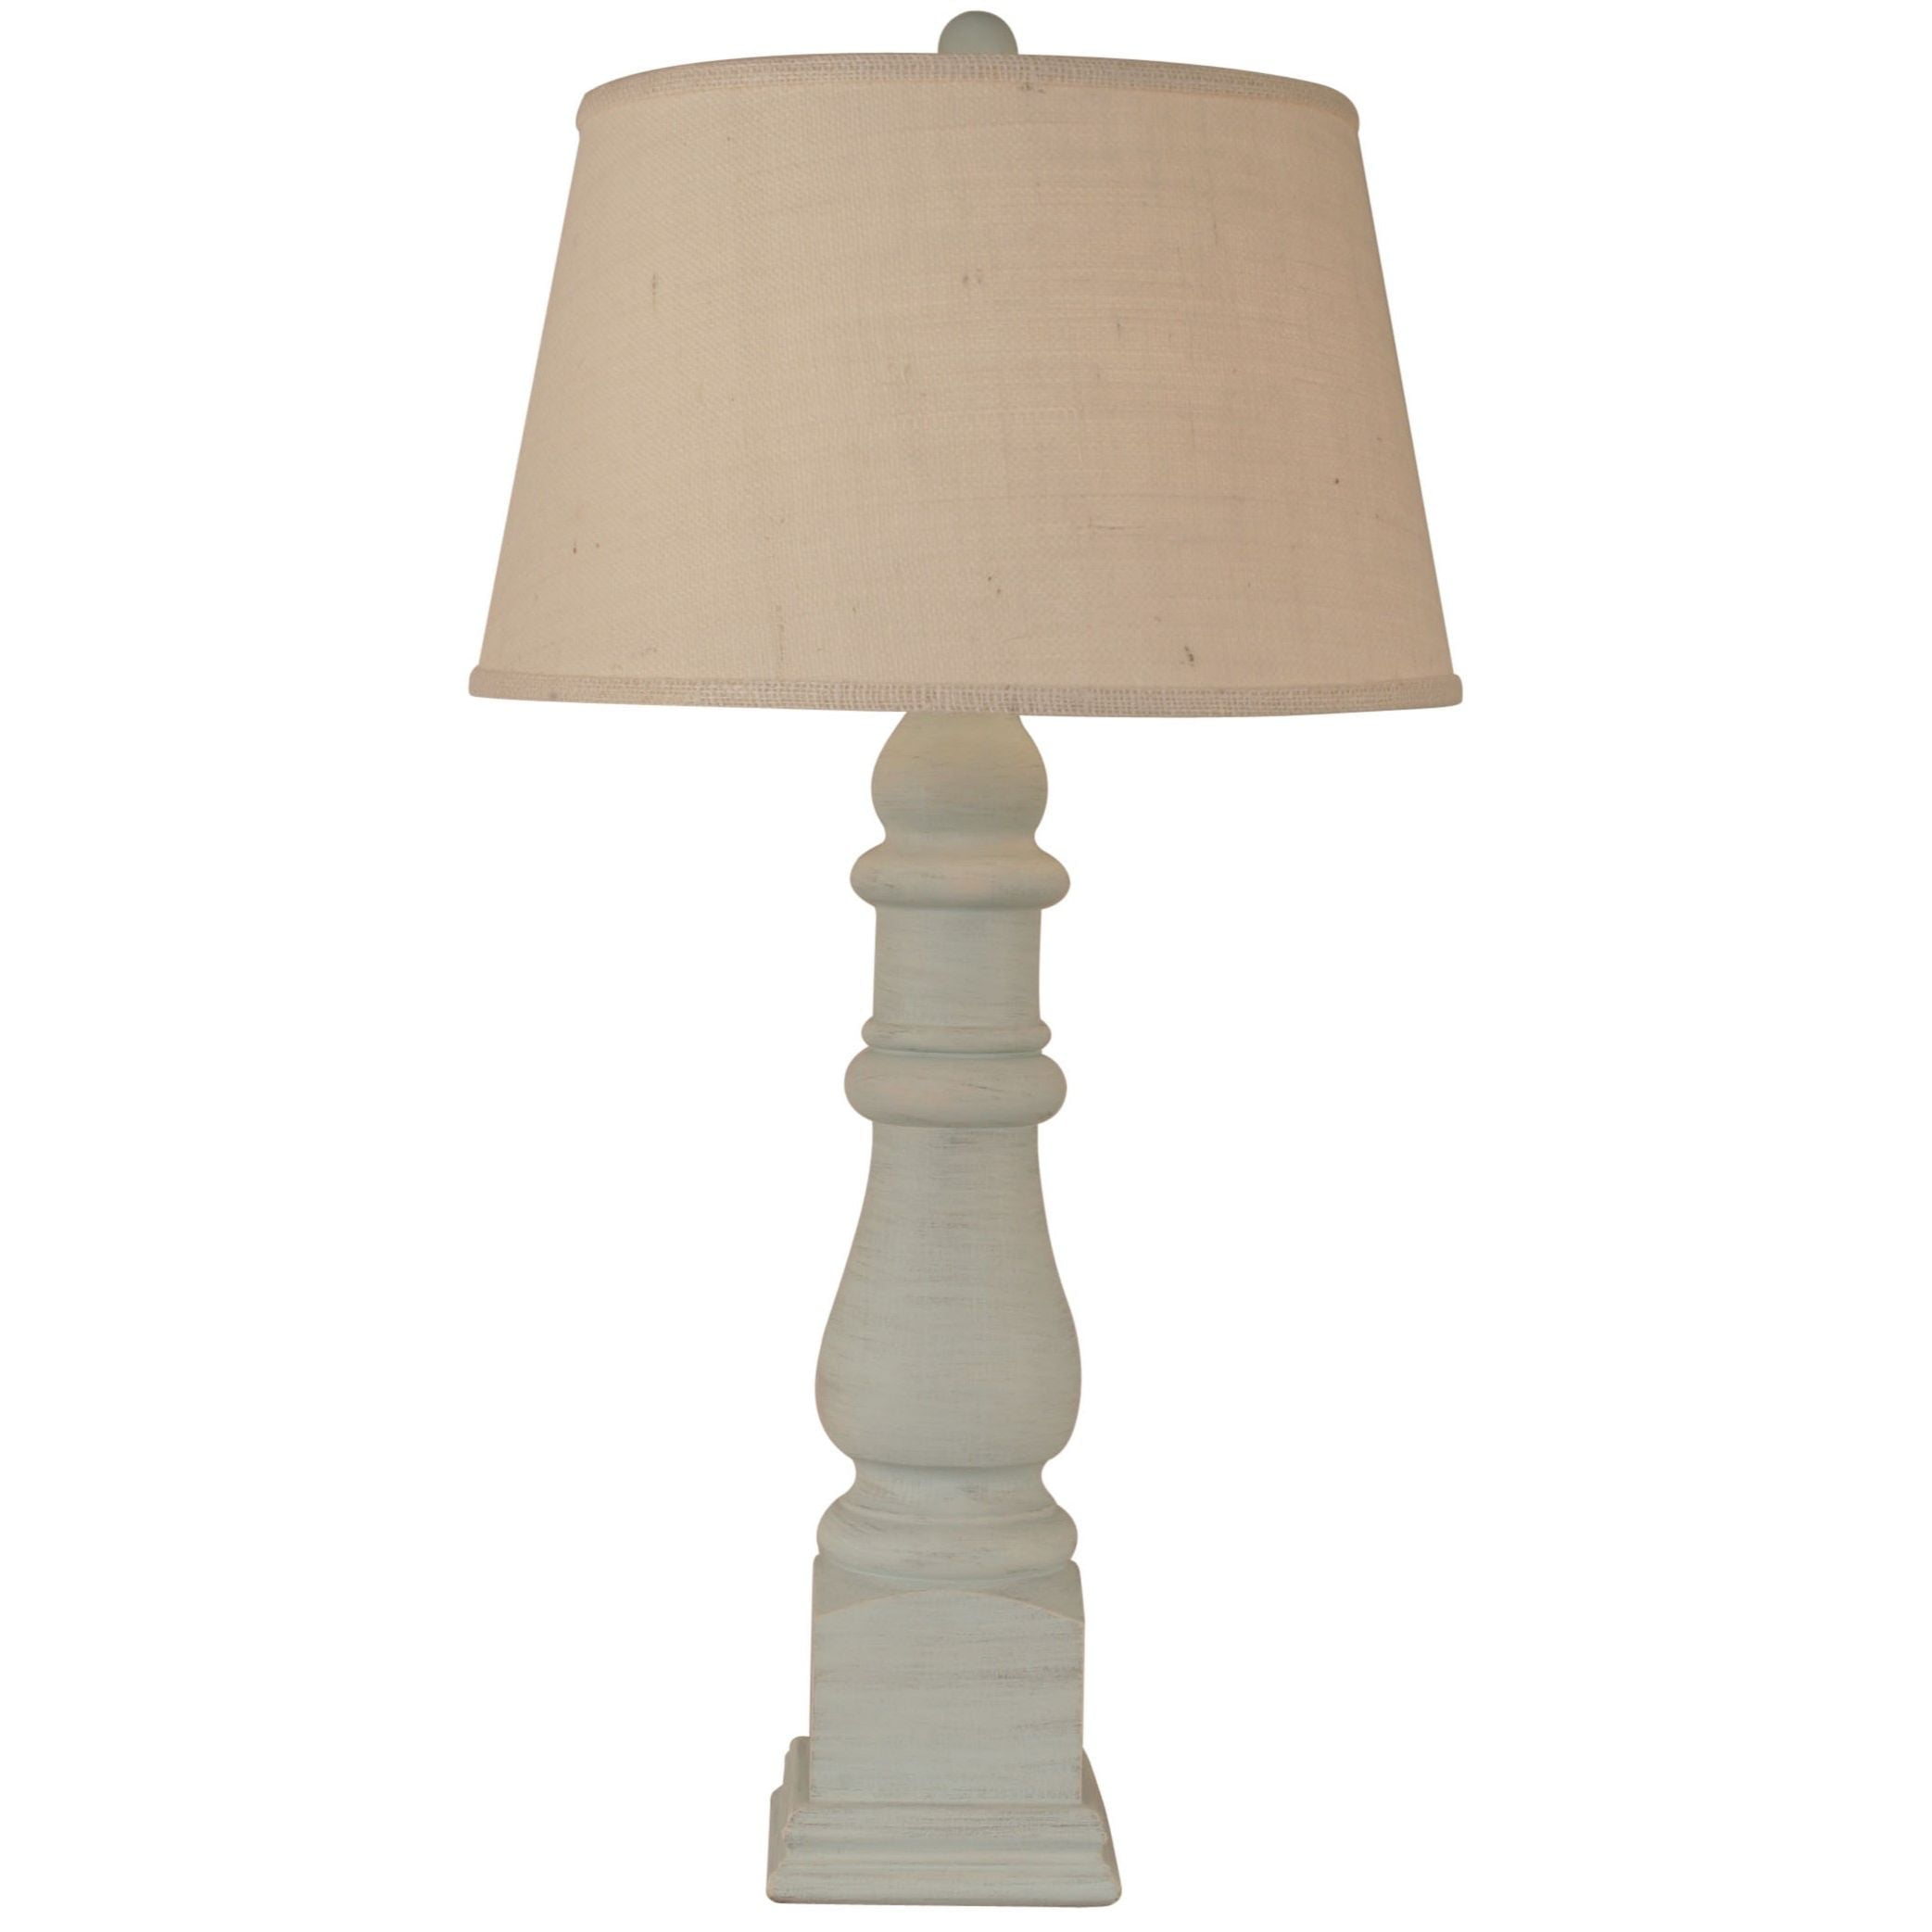 Country Squire Table Lamp